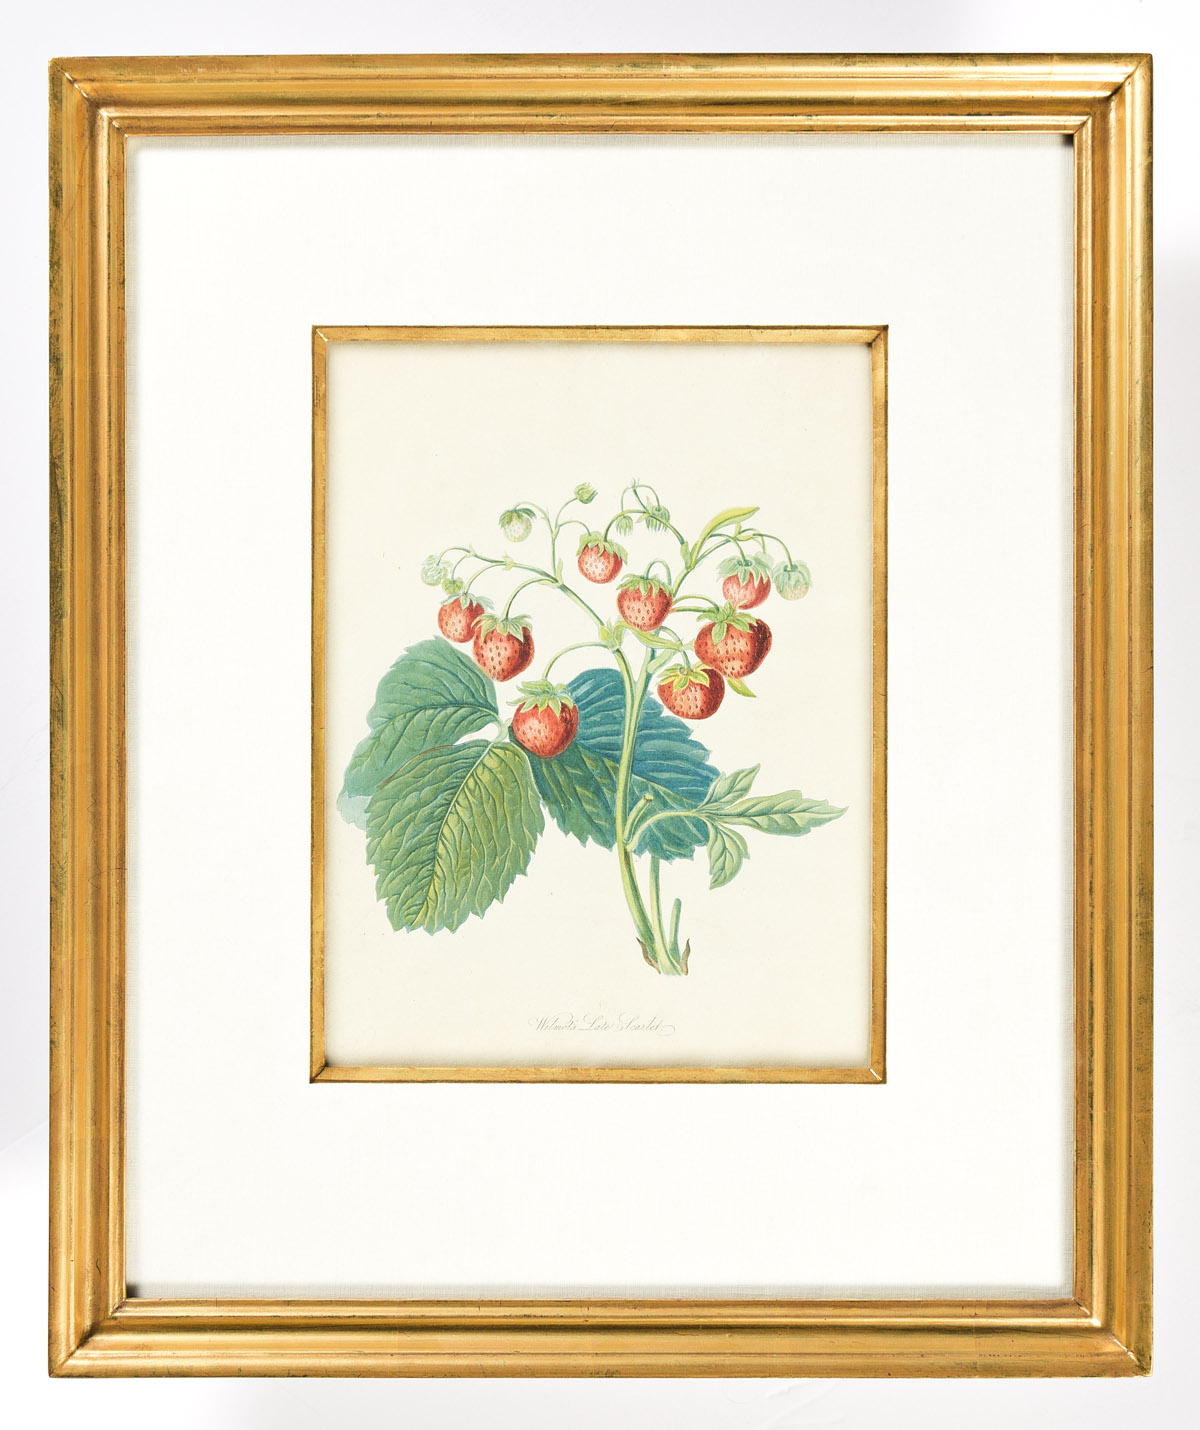 (FRUIT.) William Hooker. Group of 27 hand-colored aquatint and stipple engraved plates from Pomona Londinensis.